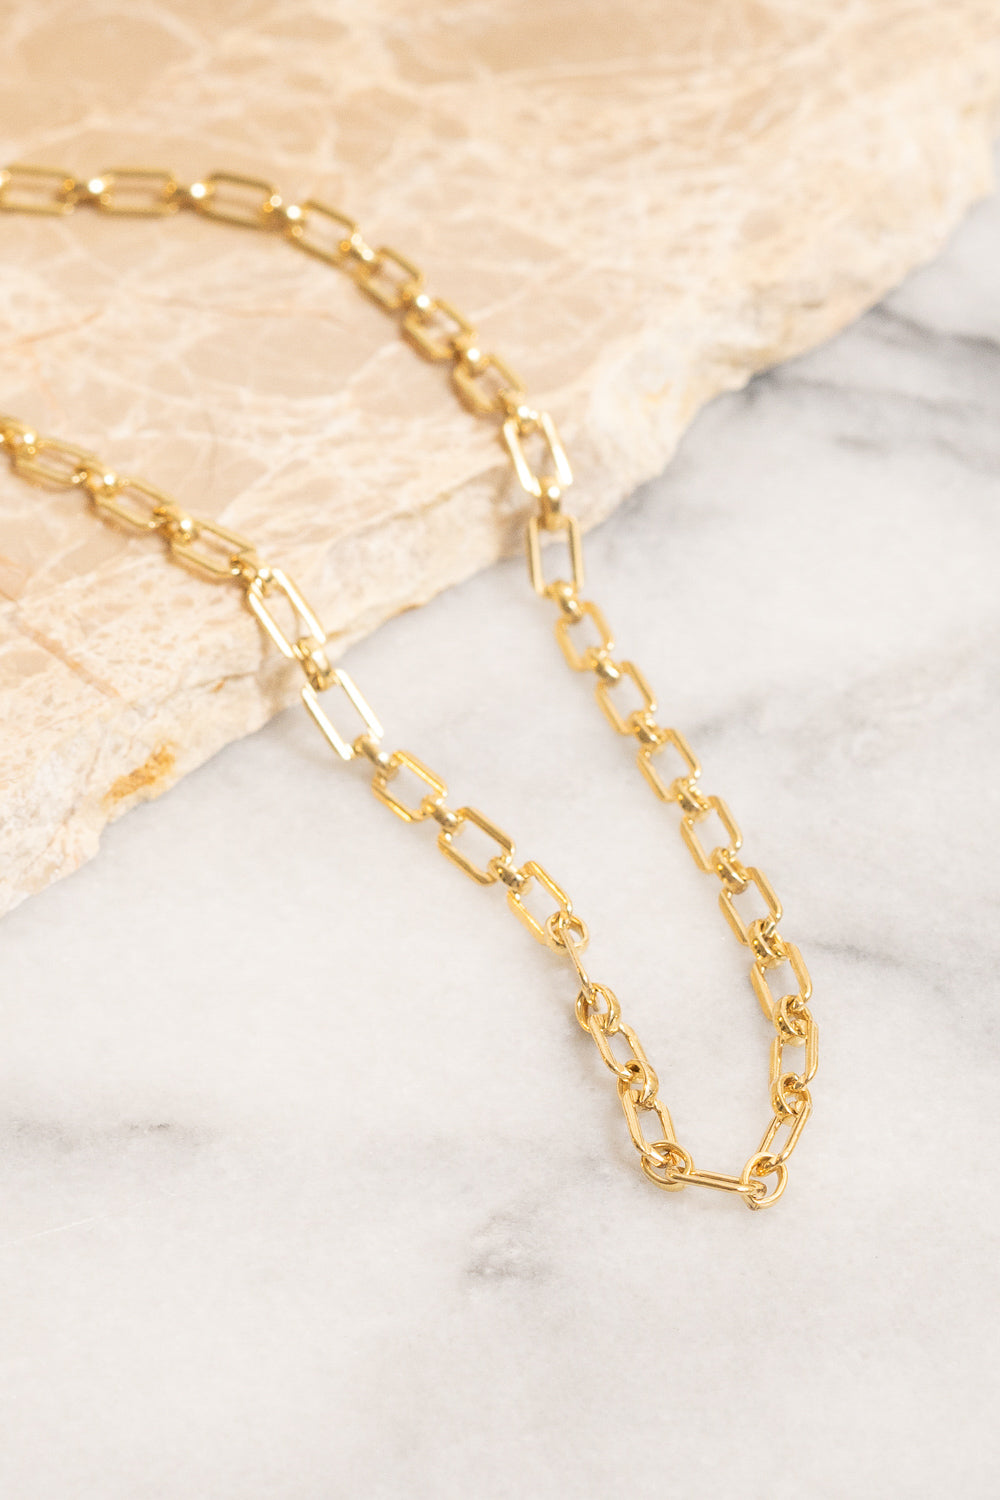 vintage style gold chain necklace